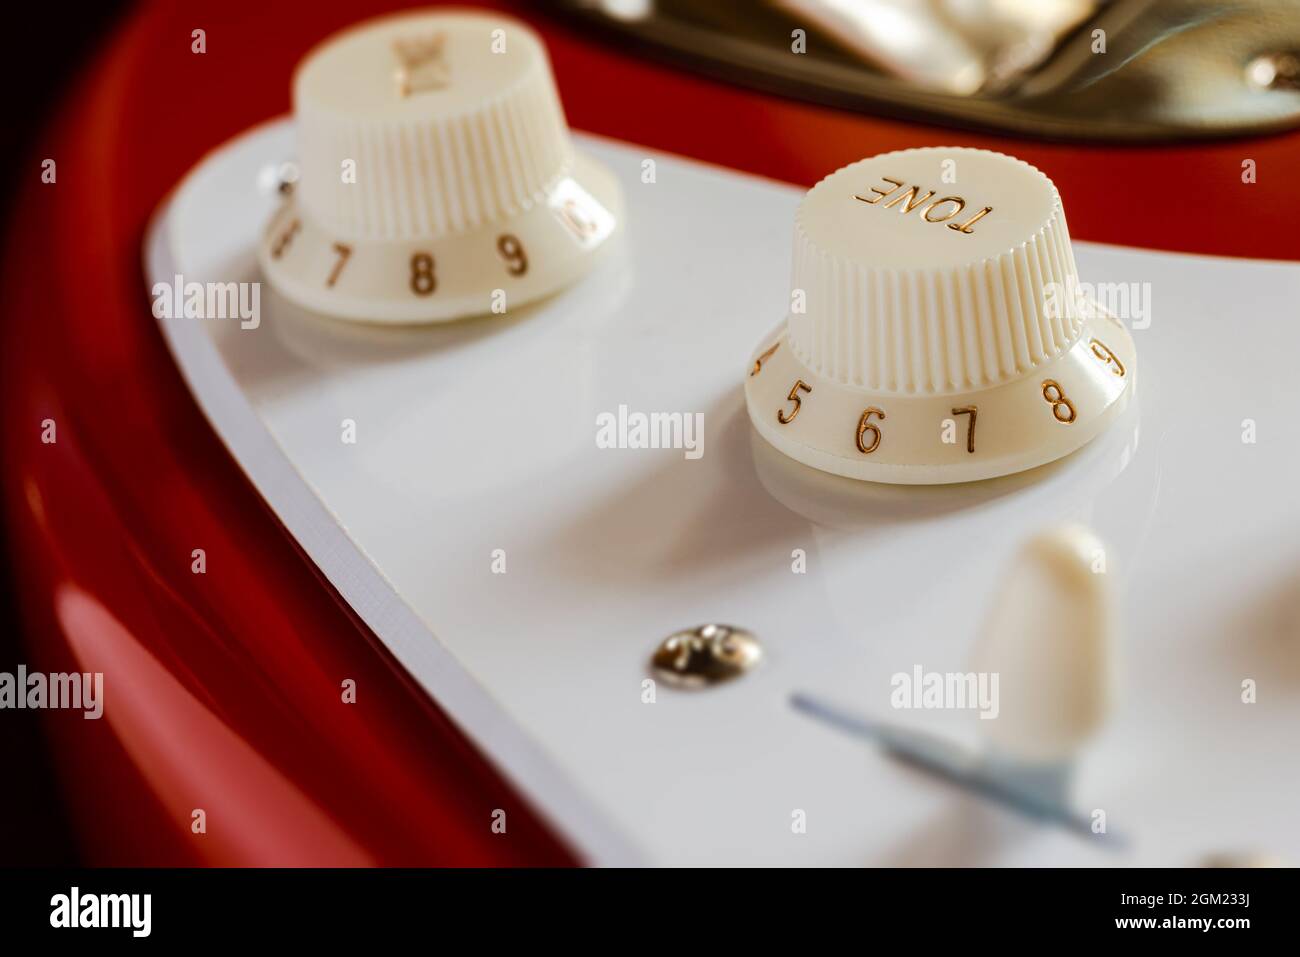 Detail of the volume and tone knobs of a red electric guitar Stock Photo